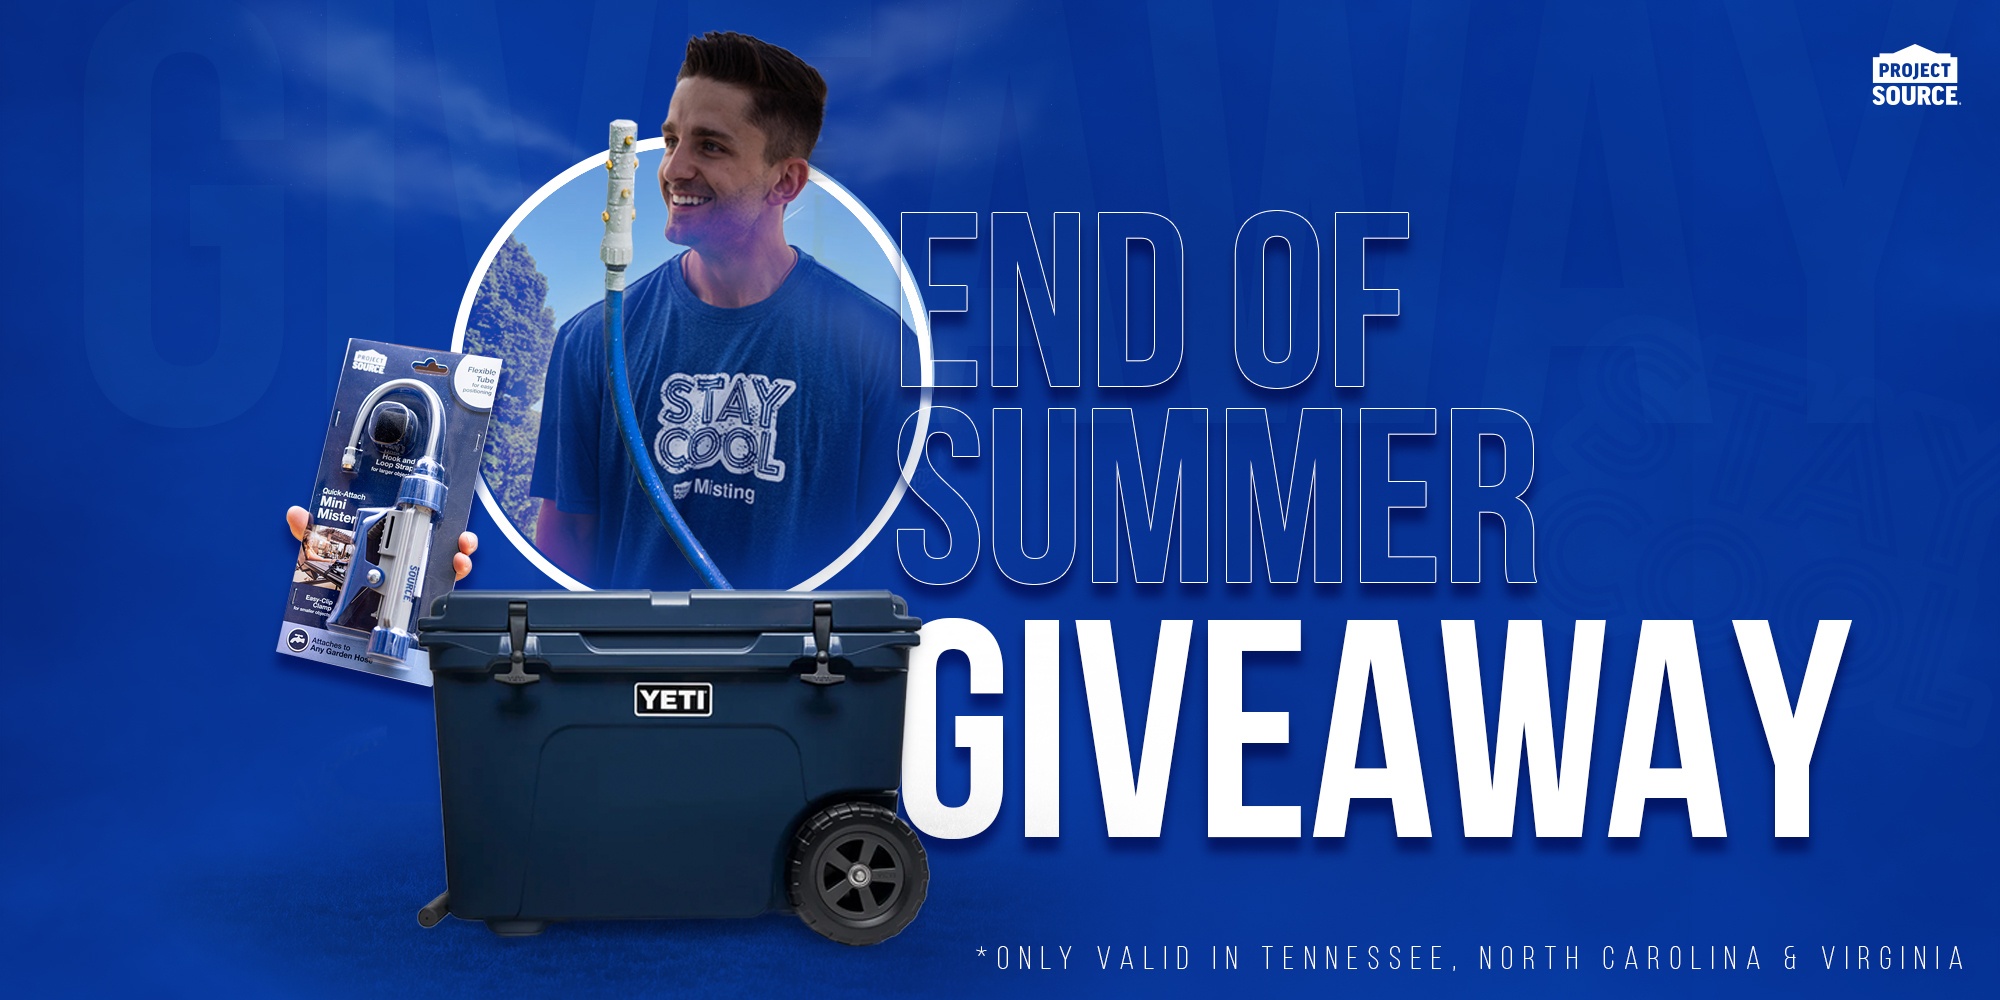 End of summer giveaway